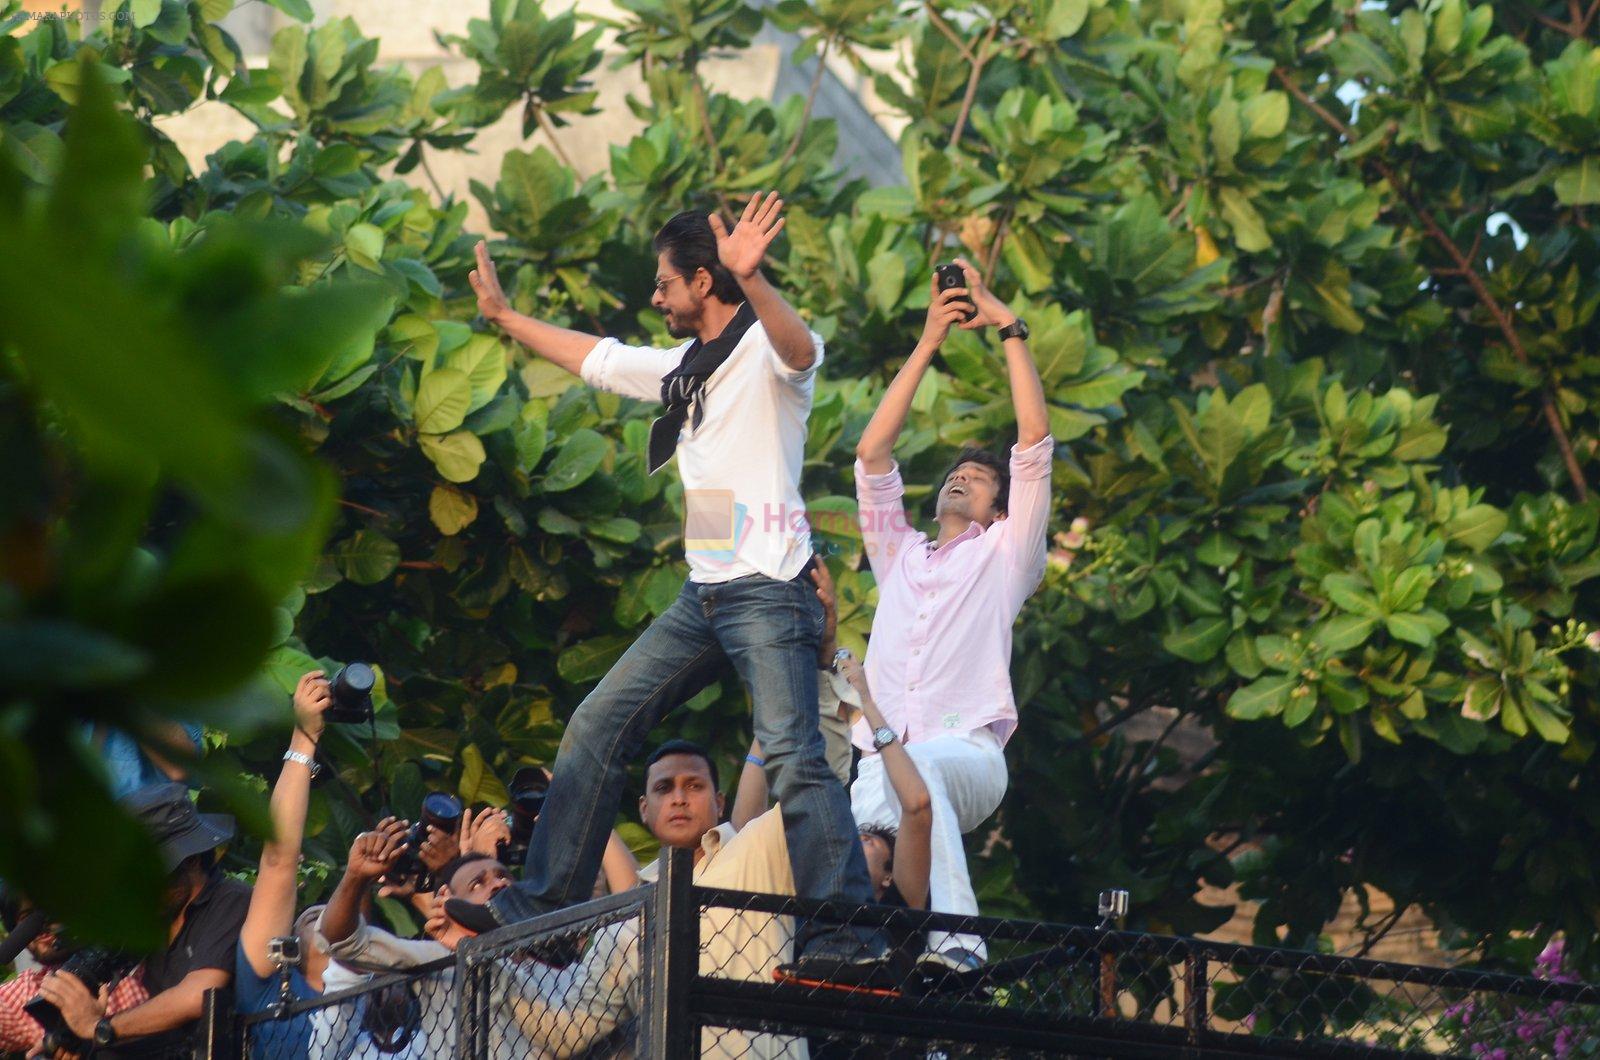 Shahrukh Khan meets fans on the eve of his 50th bday on 2nd Nov 2015